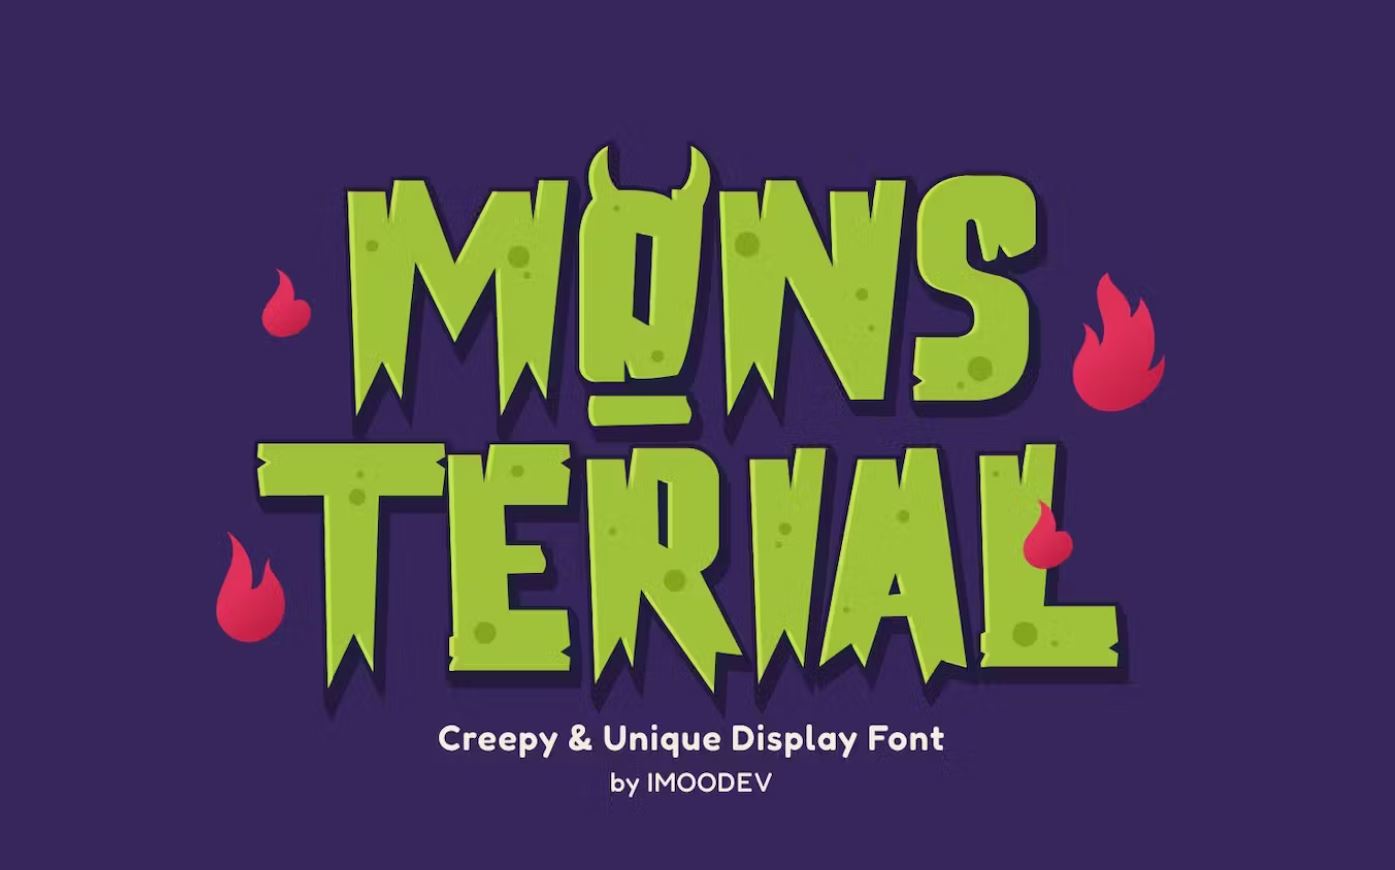 Cute and creepy style font for children related projects